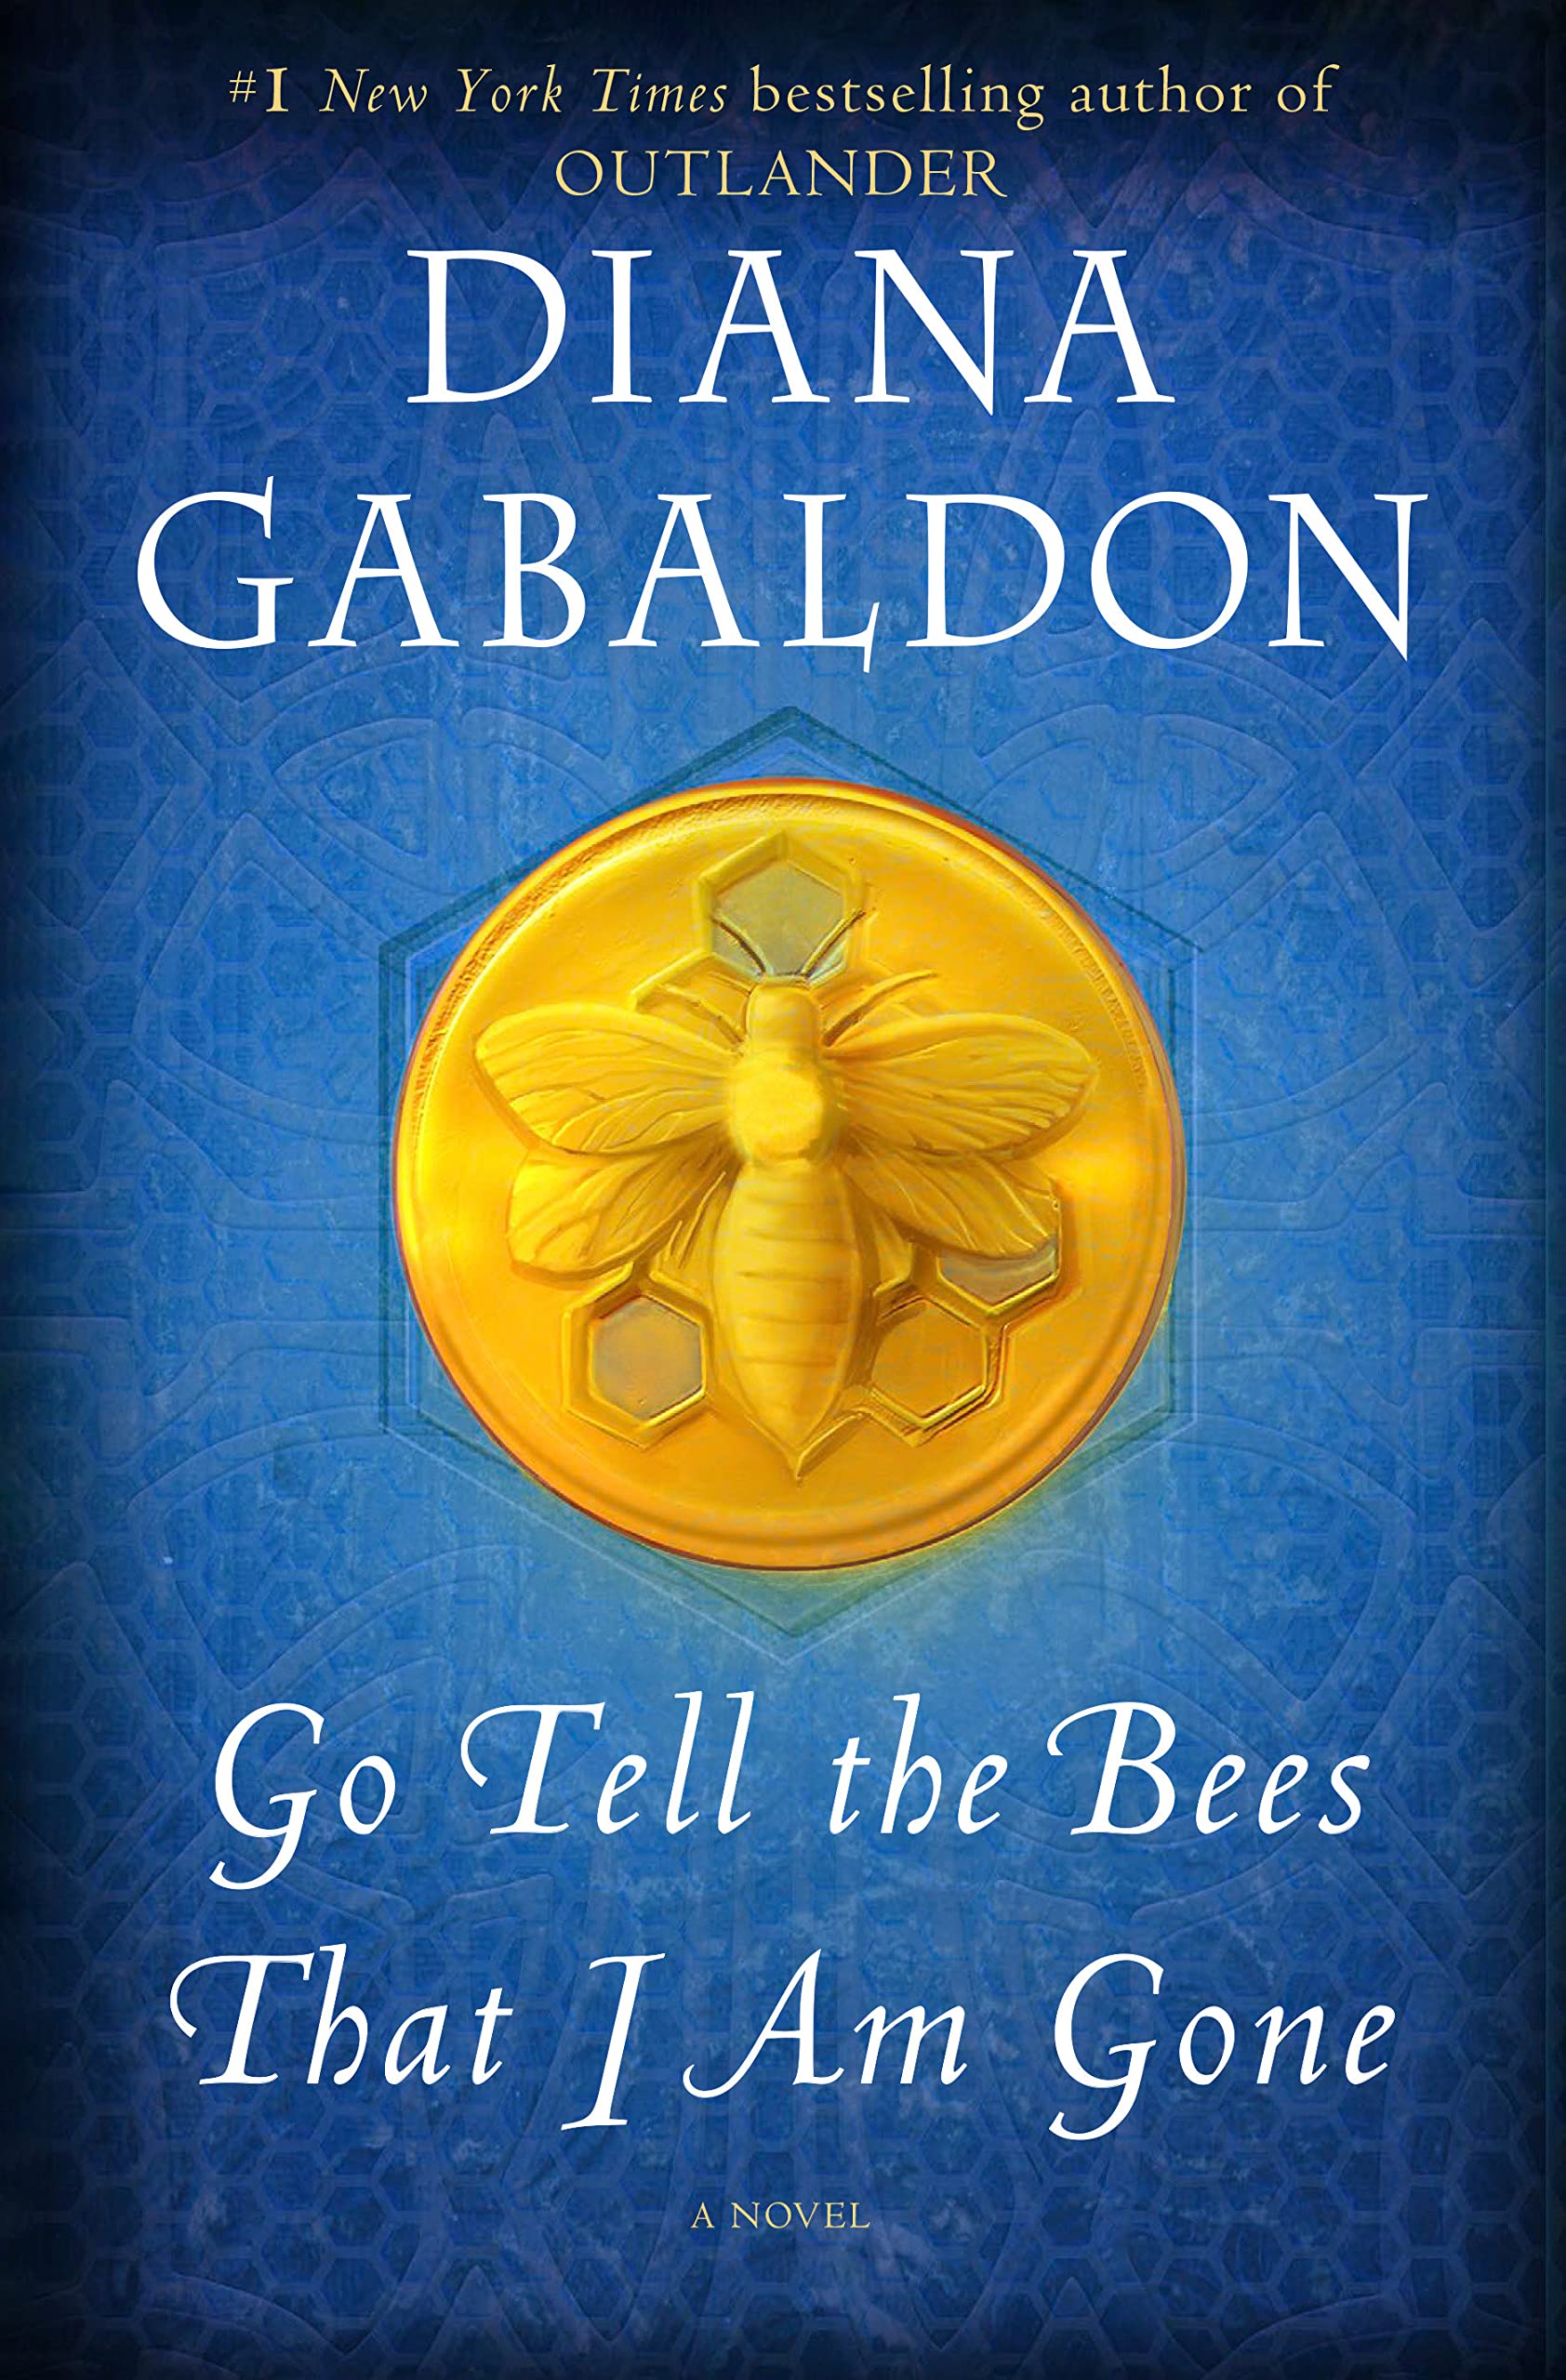 Go Tell the Bees That I Am Gone: A Novel Hardcover by Diana Gabaldon